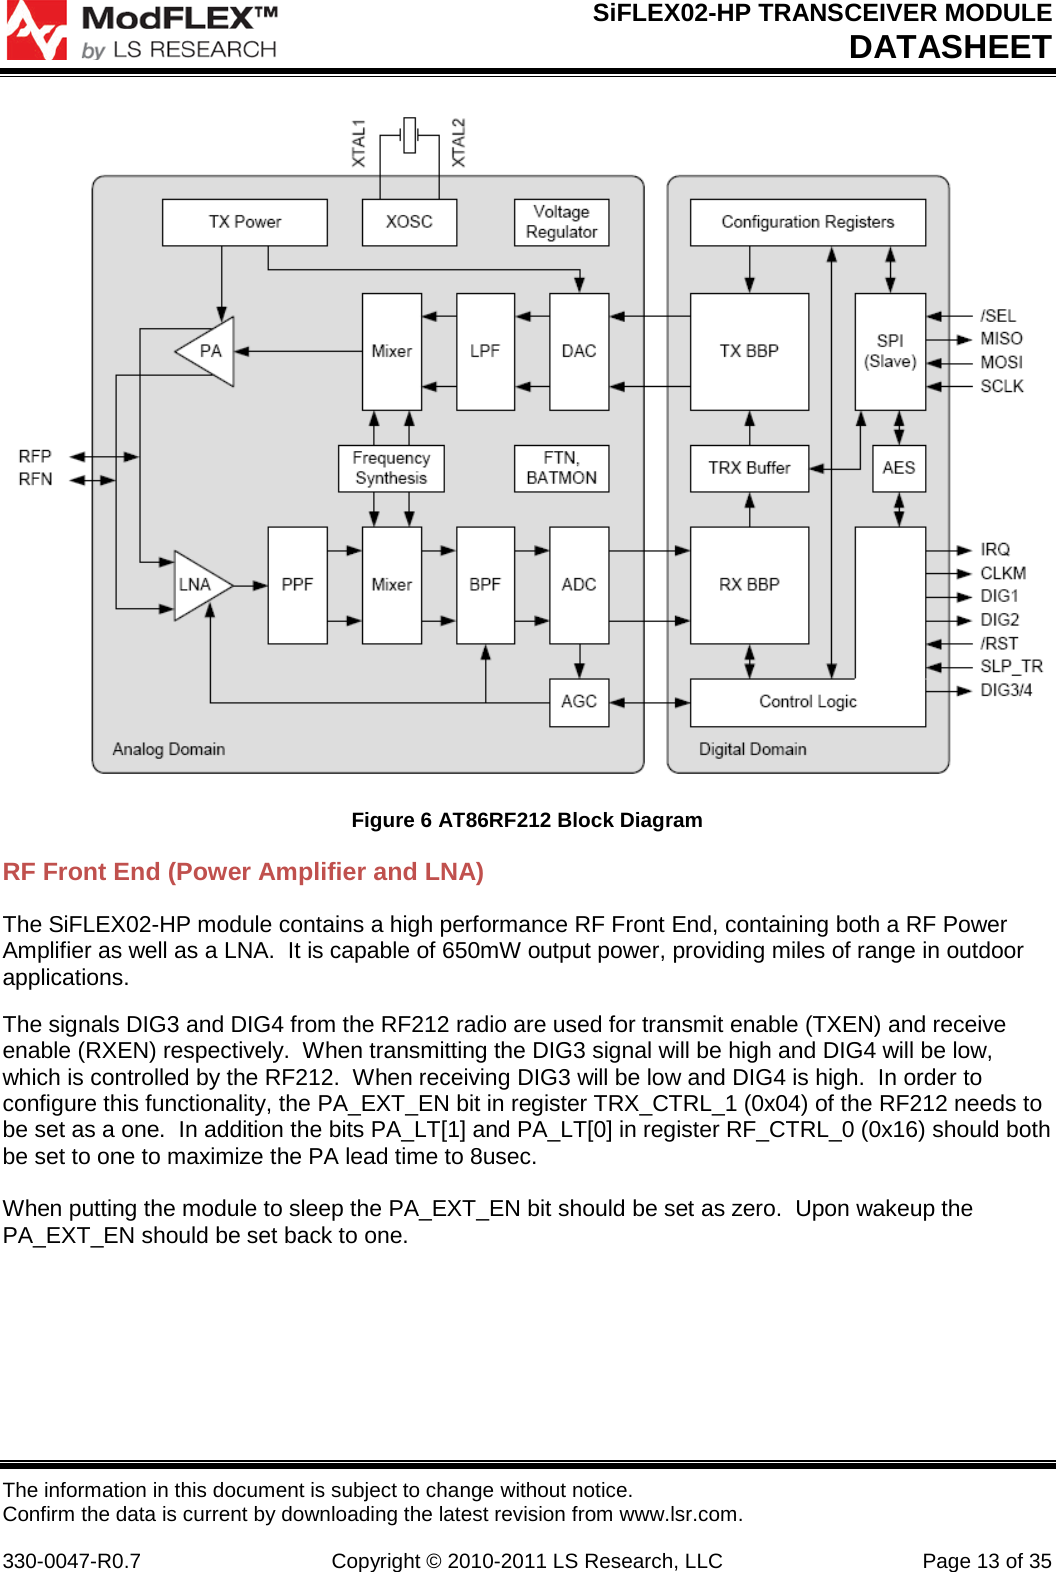 SiFLEX02-HP TRANSCEIVER MODULE DATASHEET The information in this document is subject to change without notice. Confirm the data is current by downloading the latest revision from www.lsr.com.  330-0047-R0.7  Copyright © 2010-2011 LS Research, LLC Page 13 of 35  Figure 6 AT86RF212 Block Diagram RF Front End (Power Amplifier and LNA) The SiFLEX02-HP module contains a high performance RF Front End, containing both a RF Power Amplifier as well as a LNA.  It is capable of 650mW output power, providing miles of range in outdoor applications. The signals DIG3 and DIG4 from the RF212 radio are used for transmit enable (TXEN) and receive enable (RXEN) respectively.  When transmitting the DIG3 signal will be high and DIG4 will be low, which is controlled by the RF212.  When receiving DIG3 will be low and DIG4 is high.  In order to configure this functionality, the PA_EXT_EN bit in register TRX_CTRL_1 (0x04) of the RF212 needs to be set as a one.  In addition the bits PA_LT[1] and PA_LT[0] in register RF_CTRL_0 (0x16) should both be set to one to maximize the PA lead time to 8usec.  When putting the module to sleep the PA_EXT_EN bit should be set as zero.  Upon wakeup the PA_EXT_EN should be set back to one.   